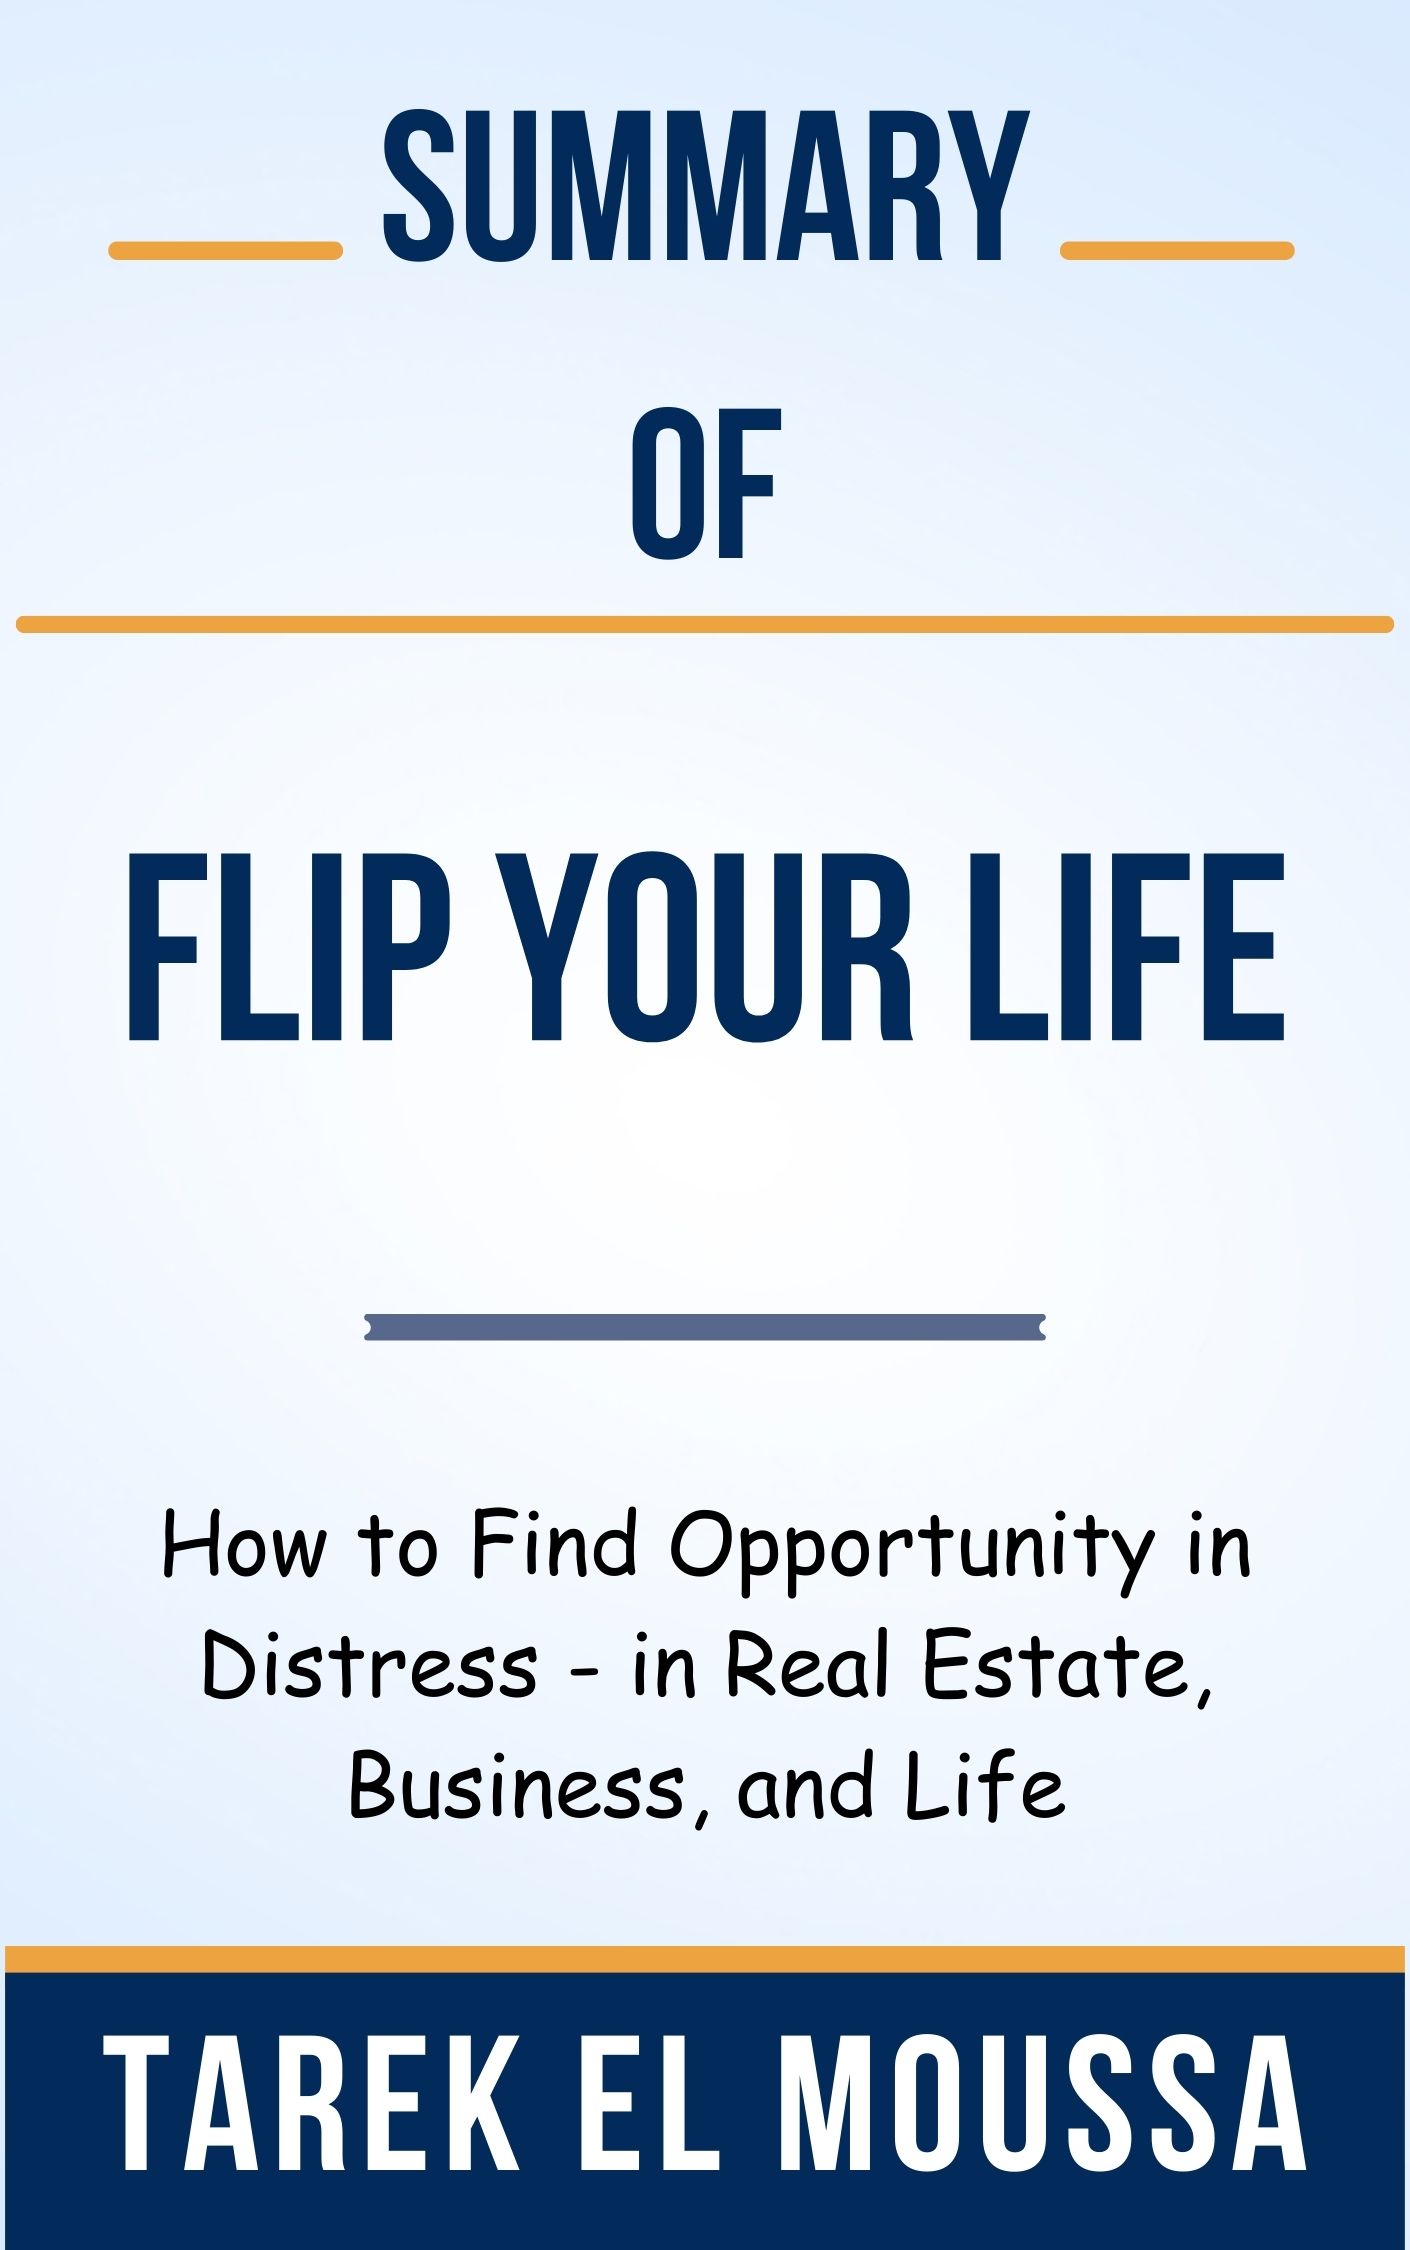 Summary-Of-Flip-Your-Life-How-to-Find-Opportunity-in-Distress---in-Real-Estate--Business--and-Life-by-Tarek-El-Moussa